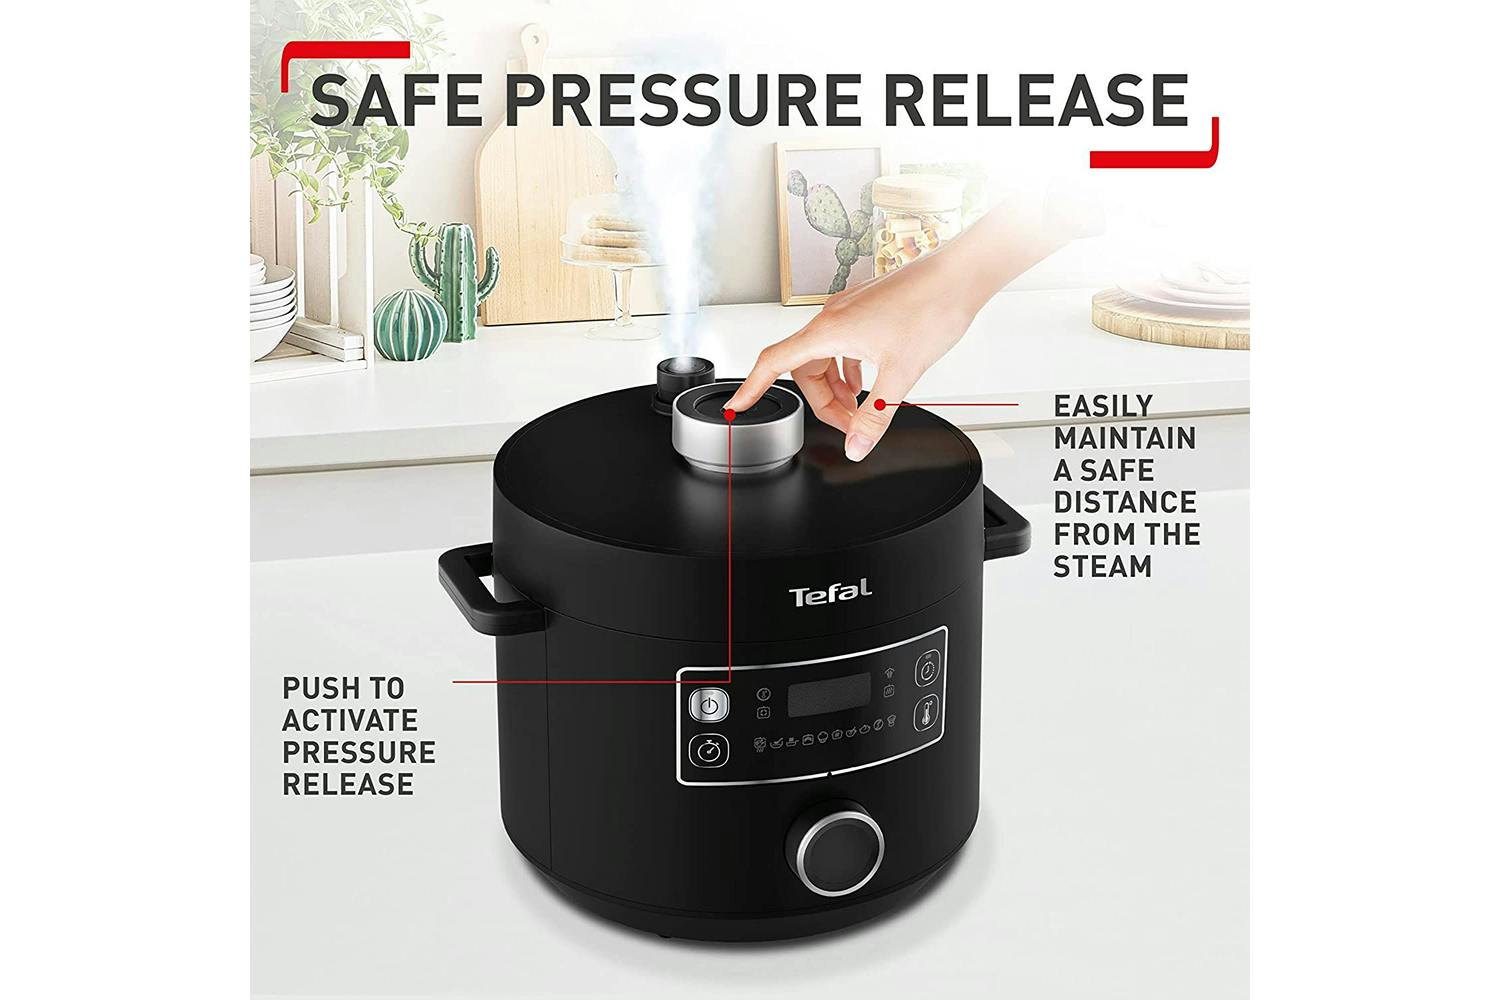 https://hniesfp.imgix.net/8/images/detailed/374/Cooker_Tefal_CY754840_5.jpg?fit=fill&bg=0FFF&w=1500&h=1000&auto=format,compress